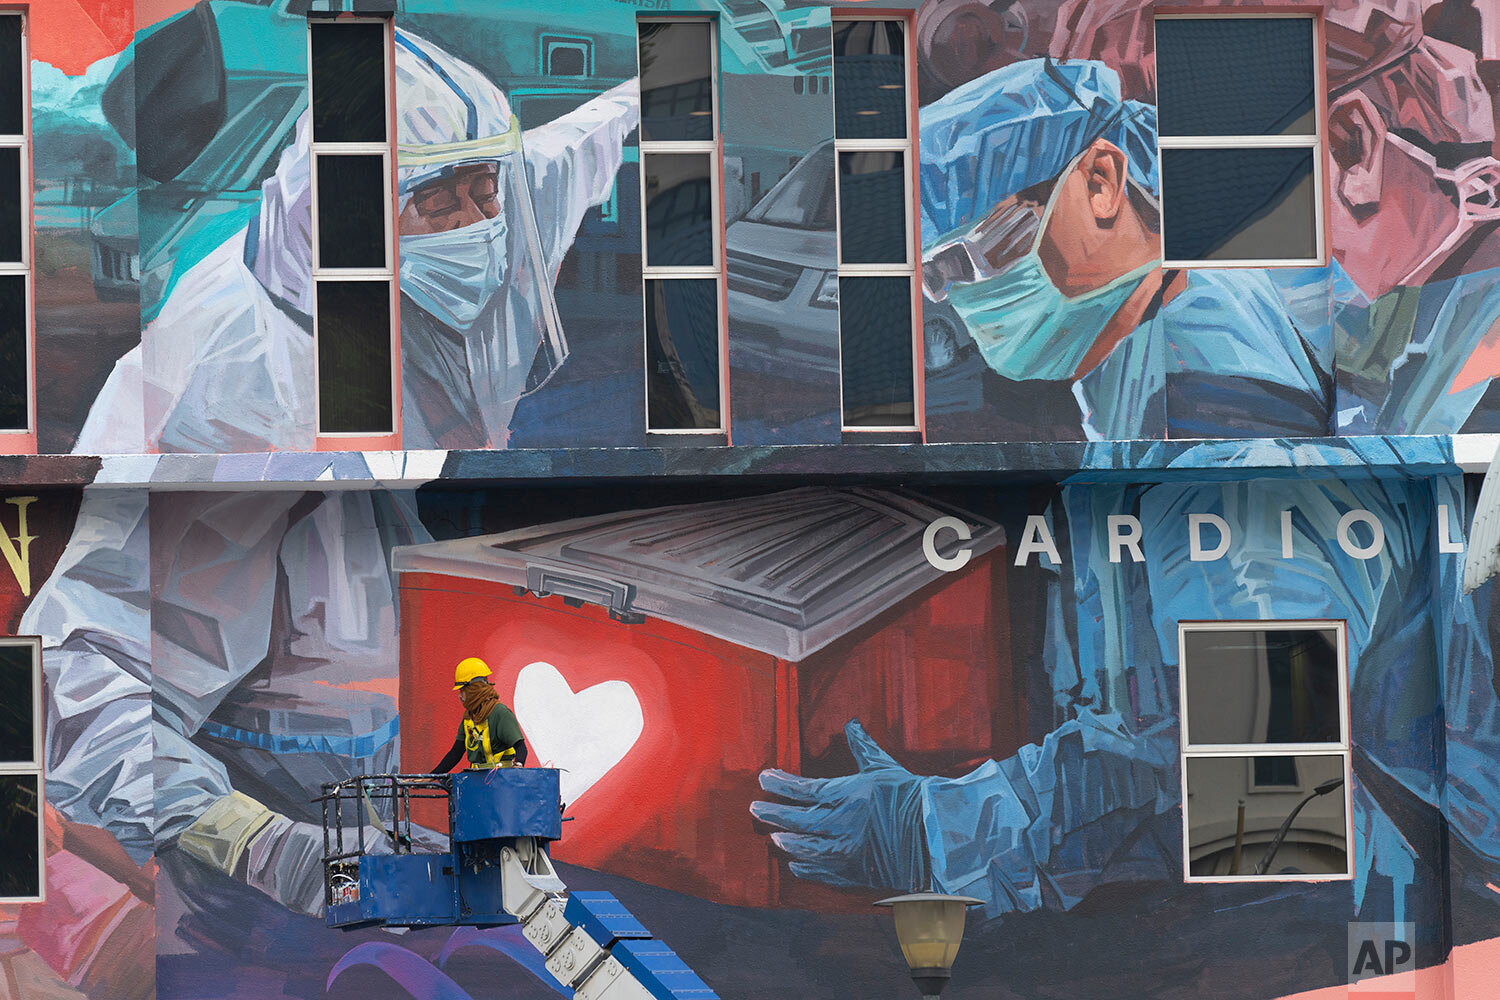  A worker adds finishing touches to giant mural tribute to frontline workers in the COVID-19 coronavirus pandemic outside a hospital in Kuala Lumpur, Malaysia, on Thursday, Jan. 21, 2021.  (AP Photo/Vincent Thian) 